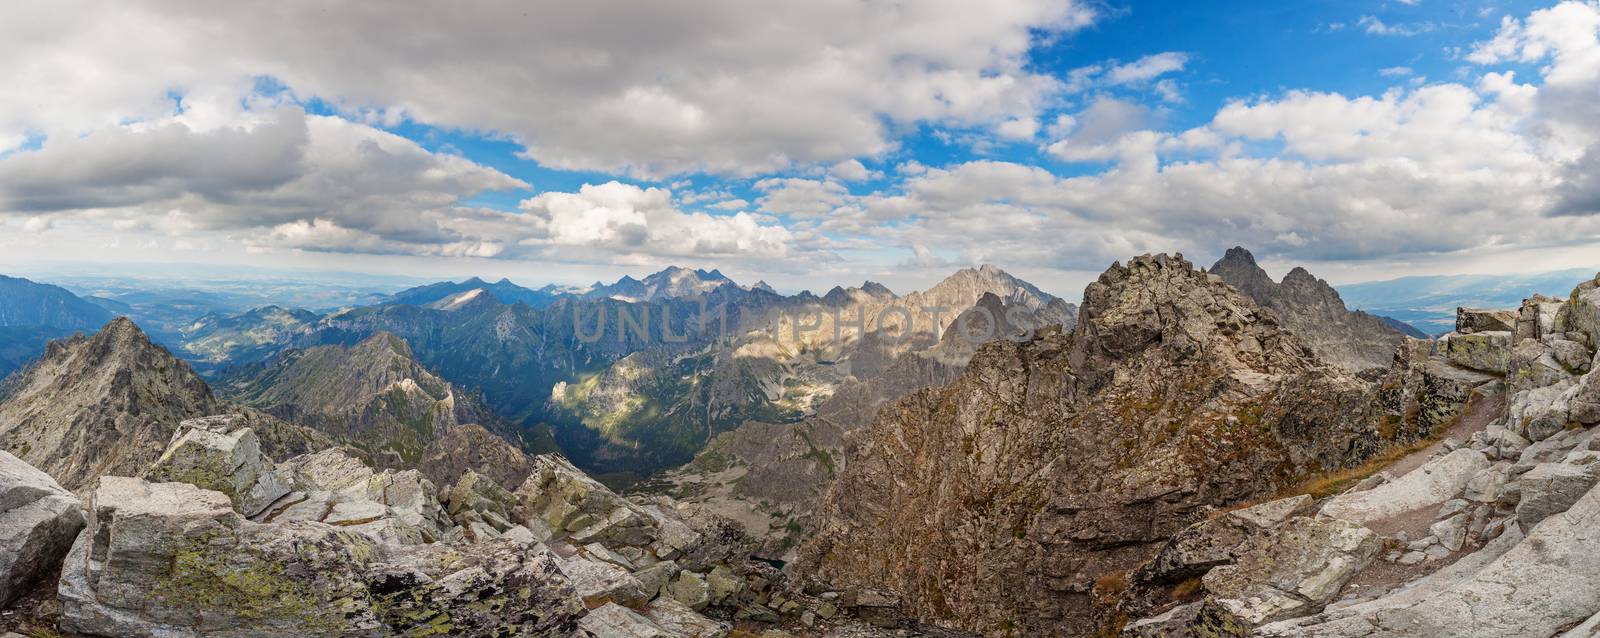 View on high Tatra Mountains from Rysy mountain with dramatic cloudy sky